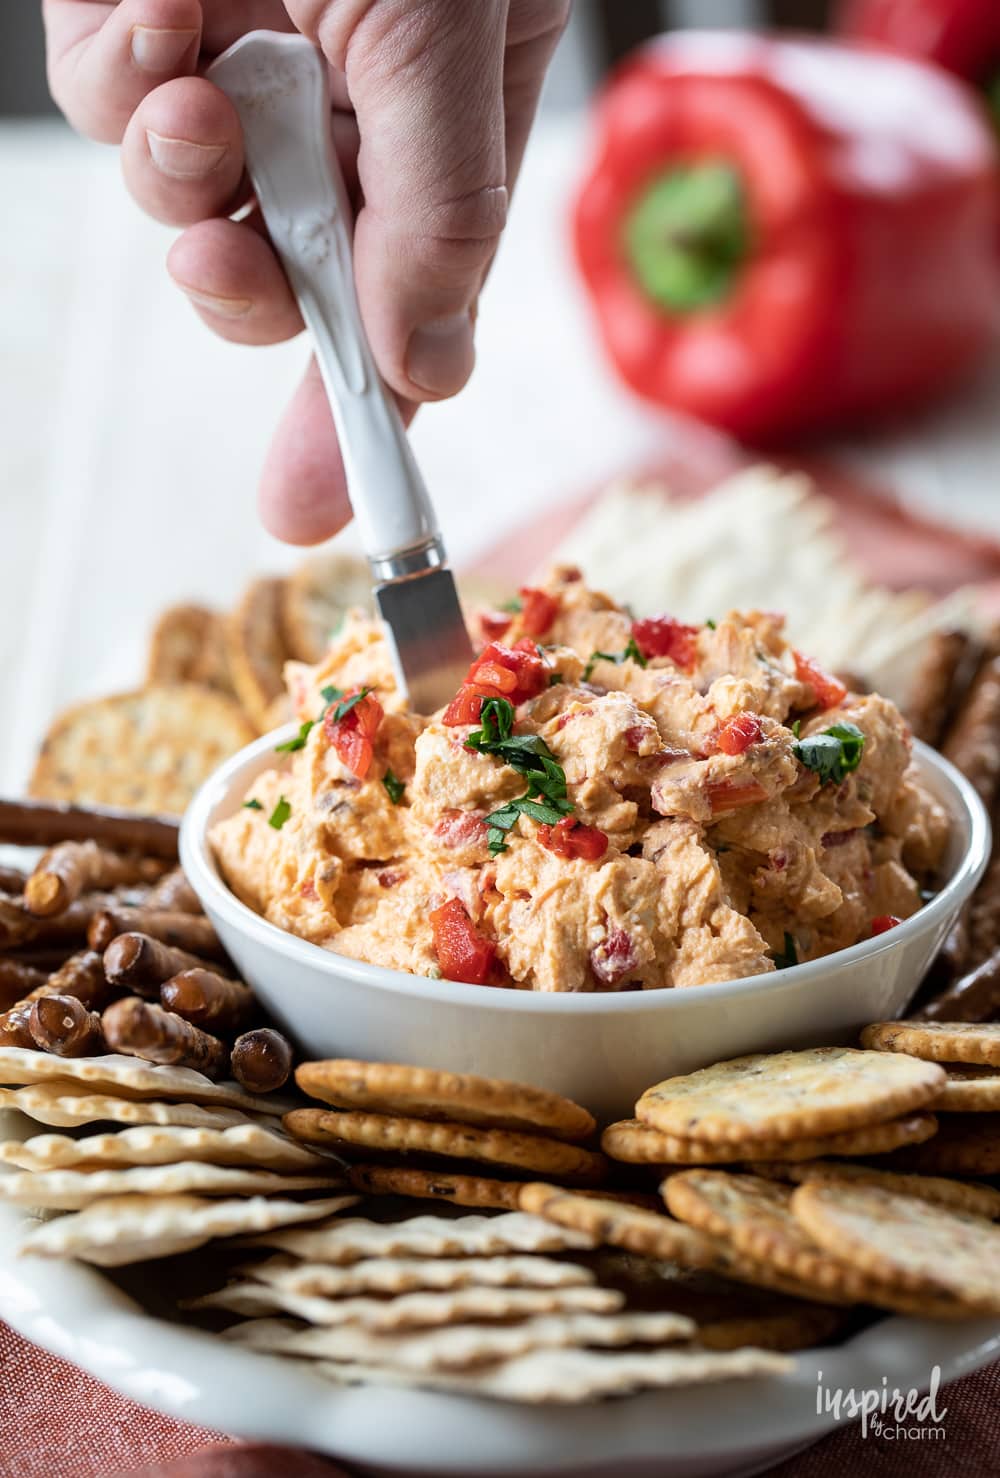 hand serving roasted red pepper dip in a bowl.